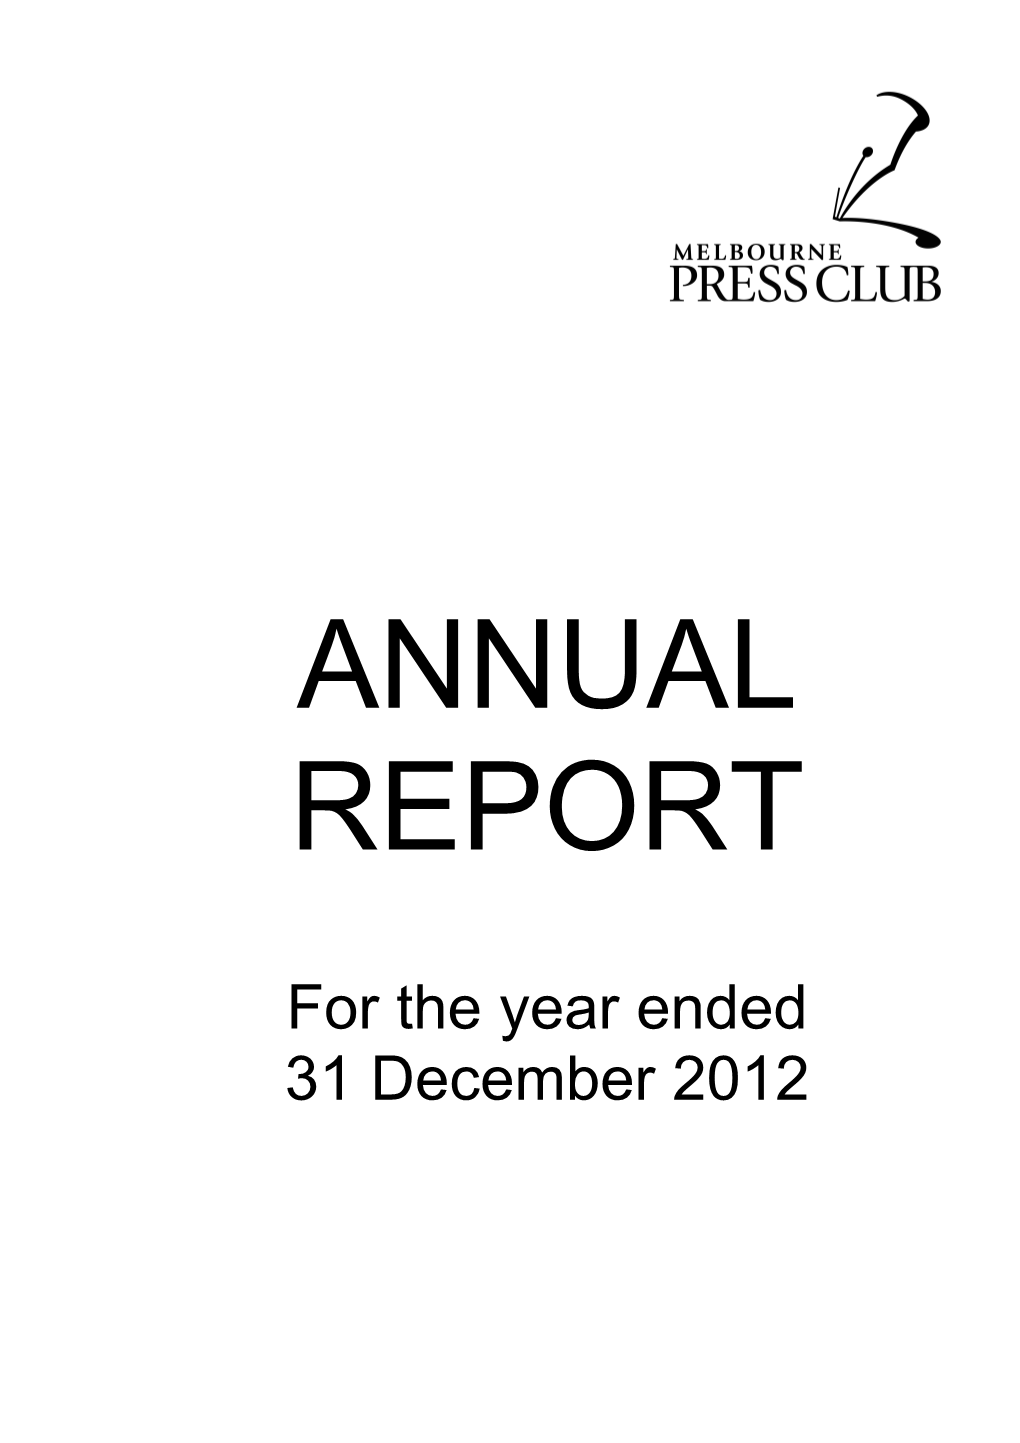 For the Year Ended 31 December 2012